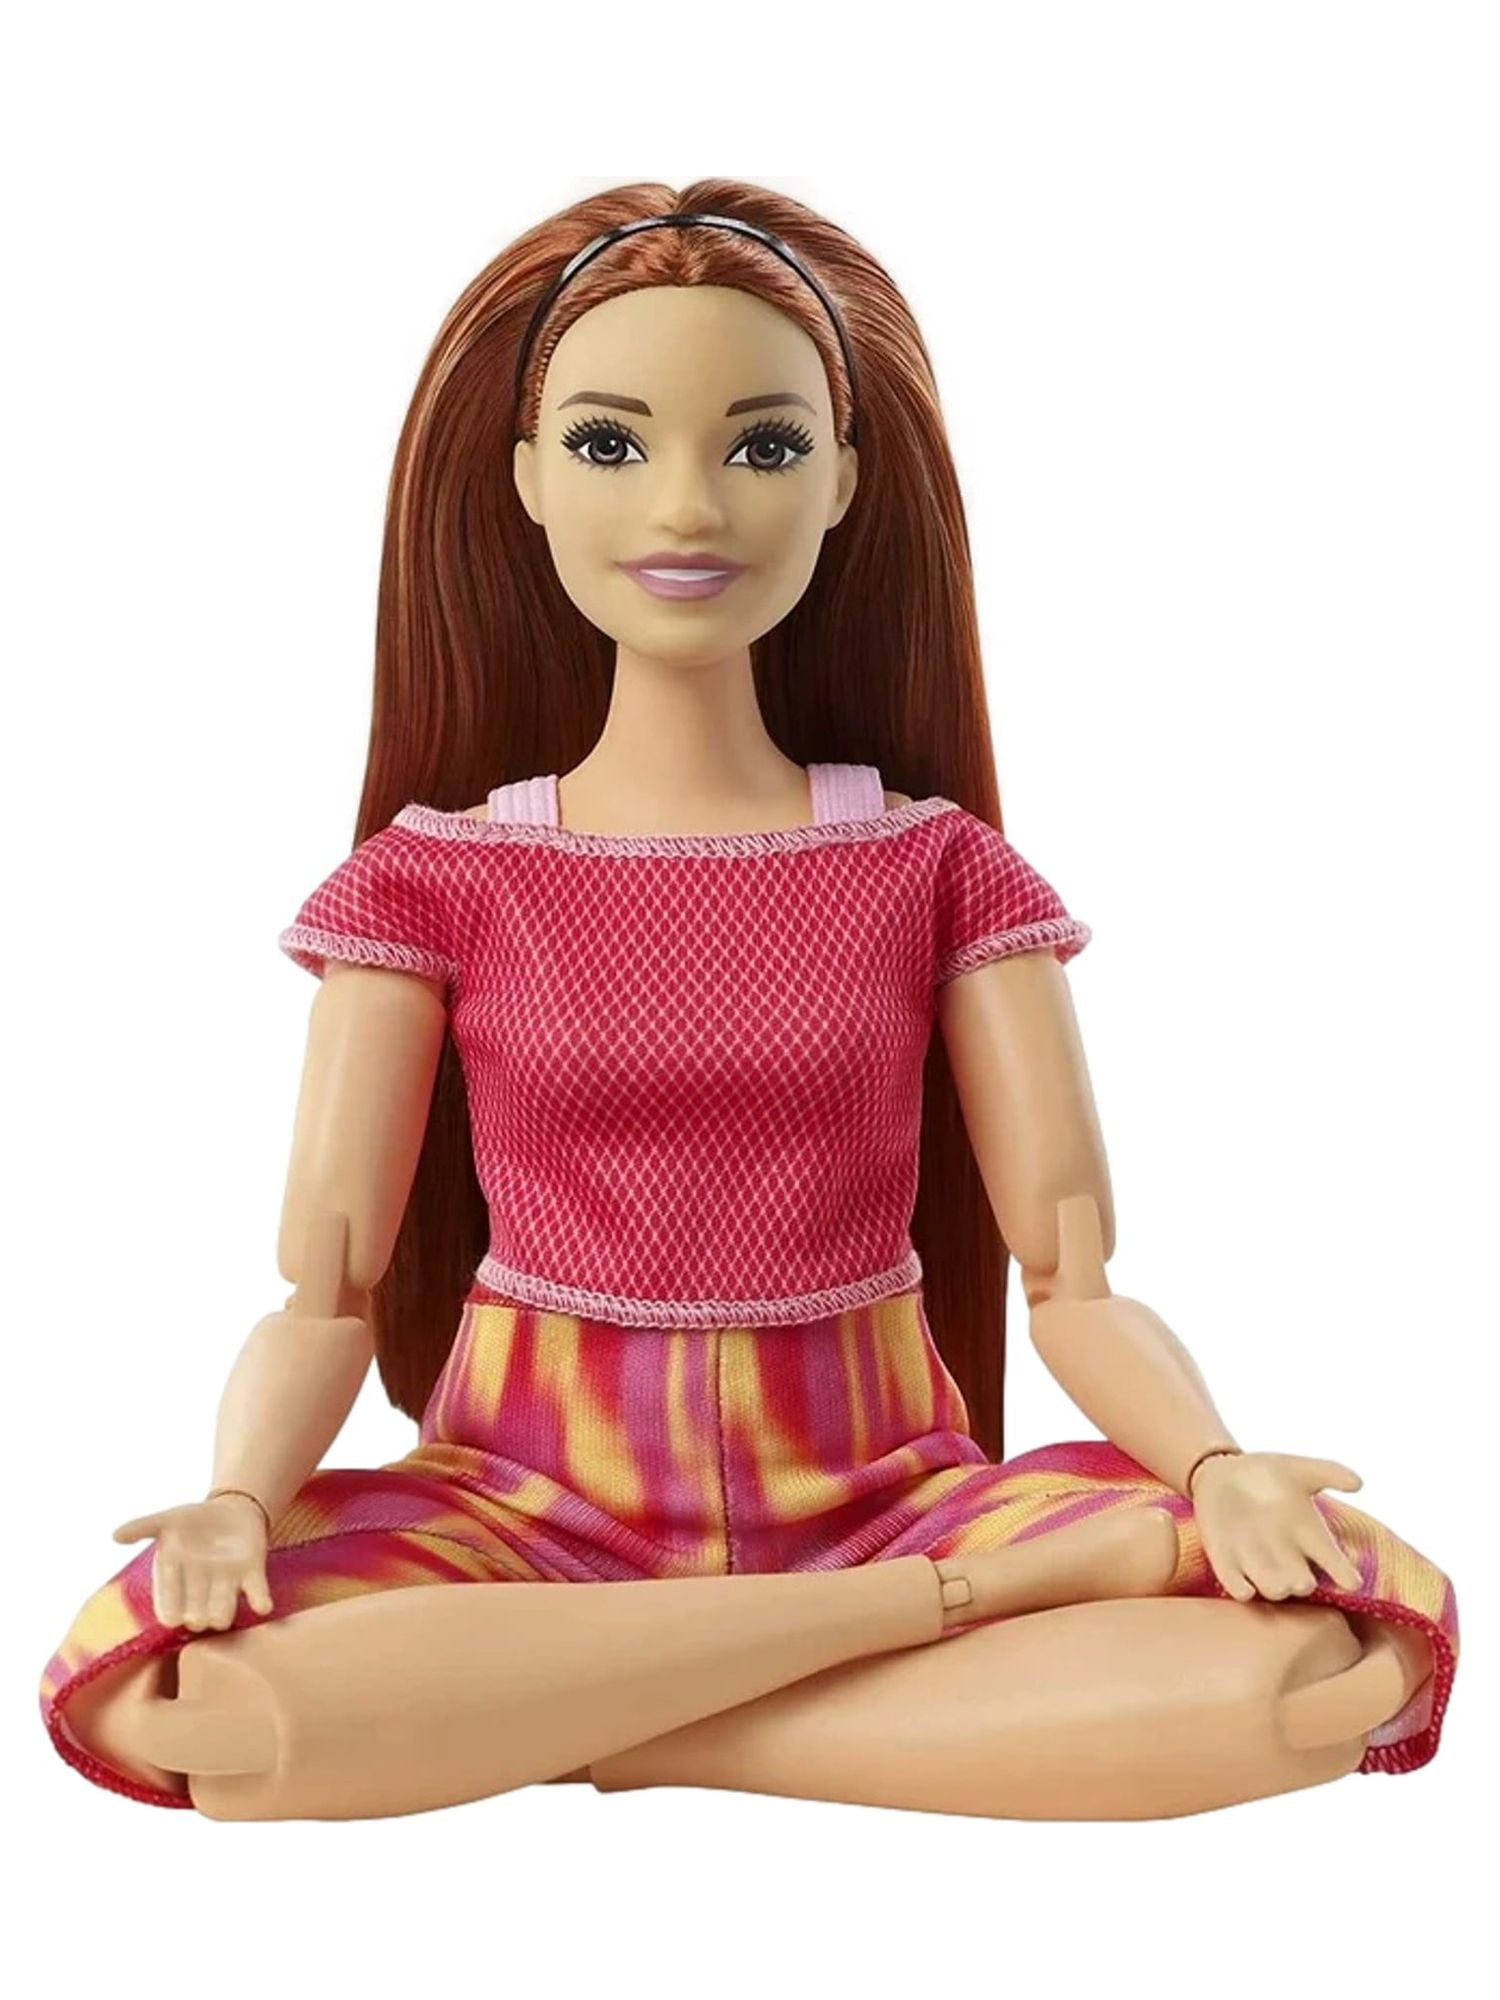 Barbie Made to Move Dolls with 22 Joints and Yoga Bangladesh